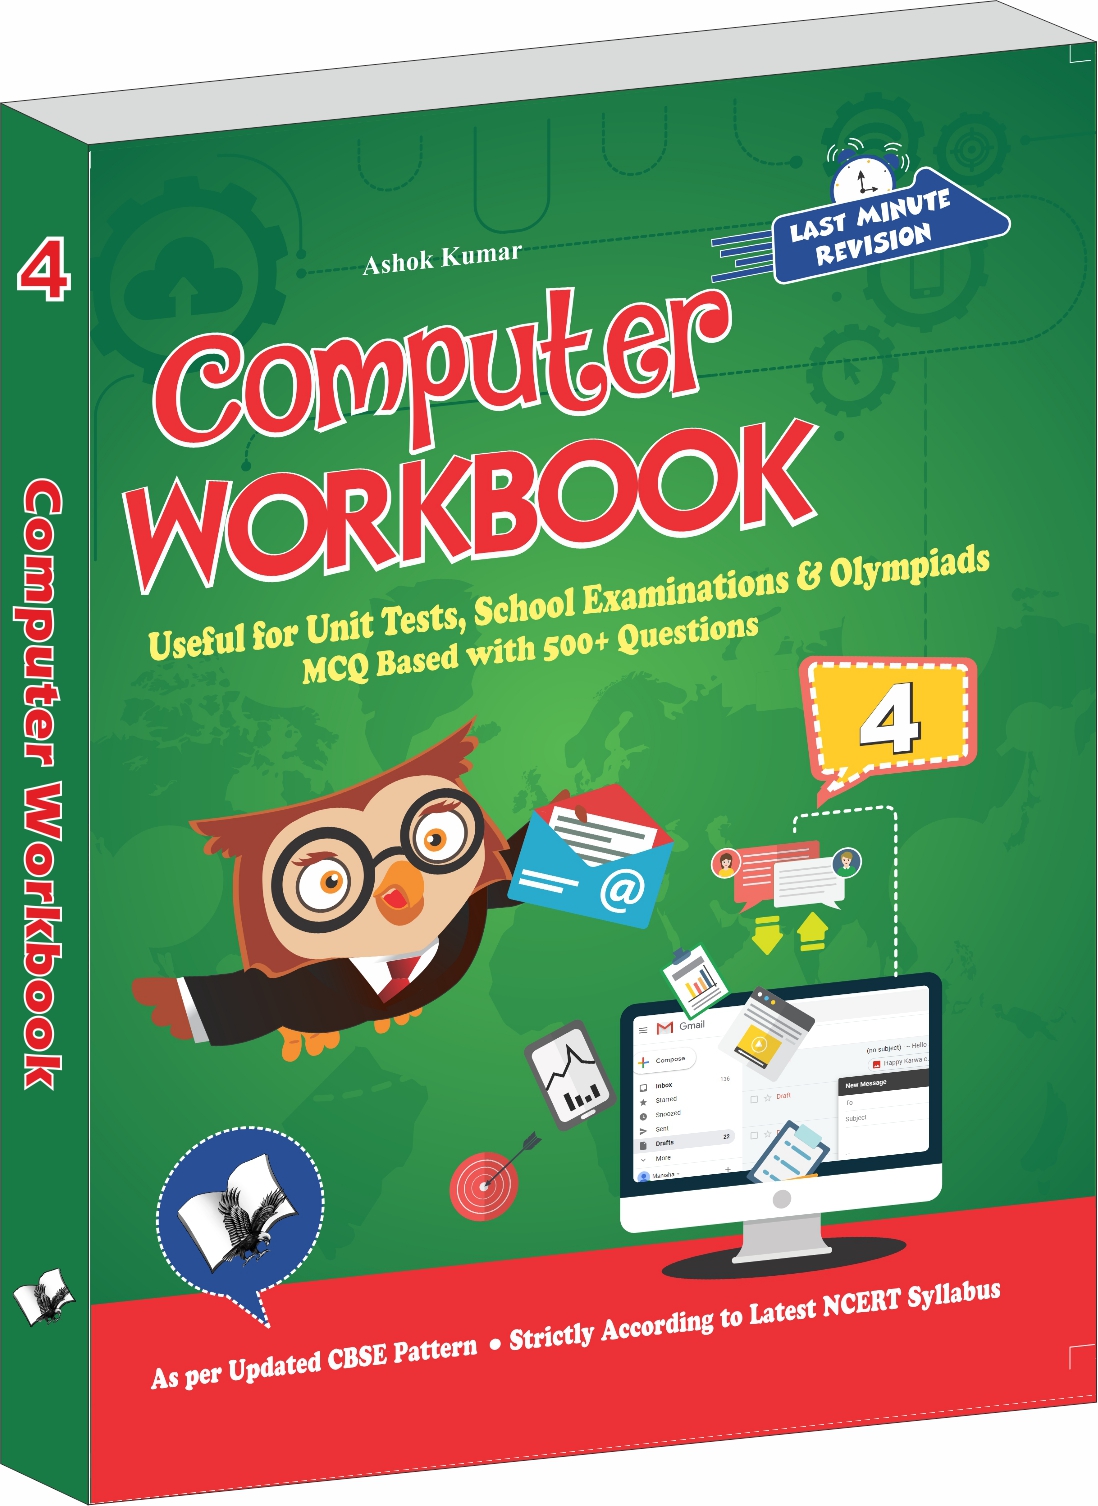 Computer Workbook Class 4-Useful for Unit Tests, School Examinations & Olympiads